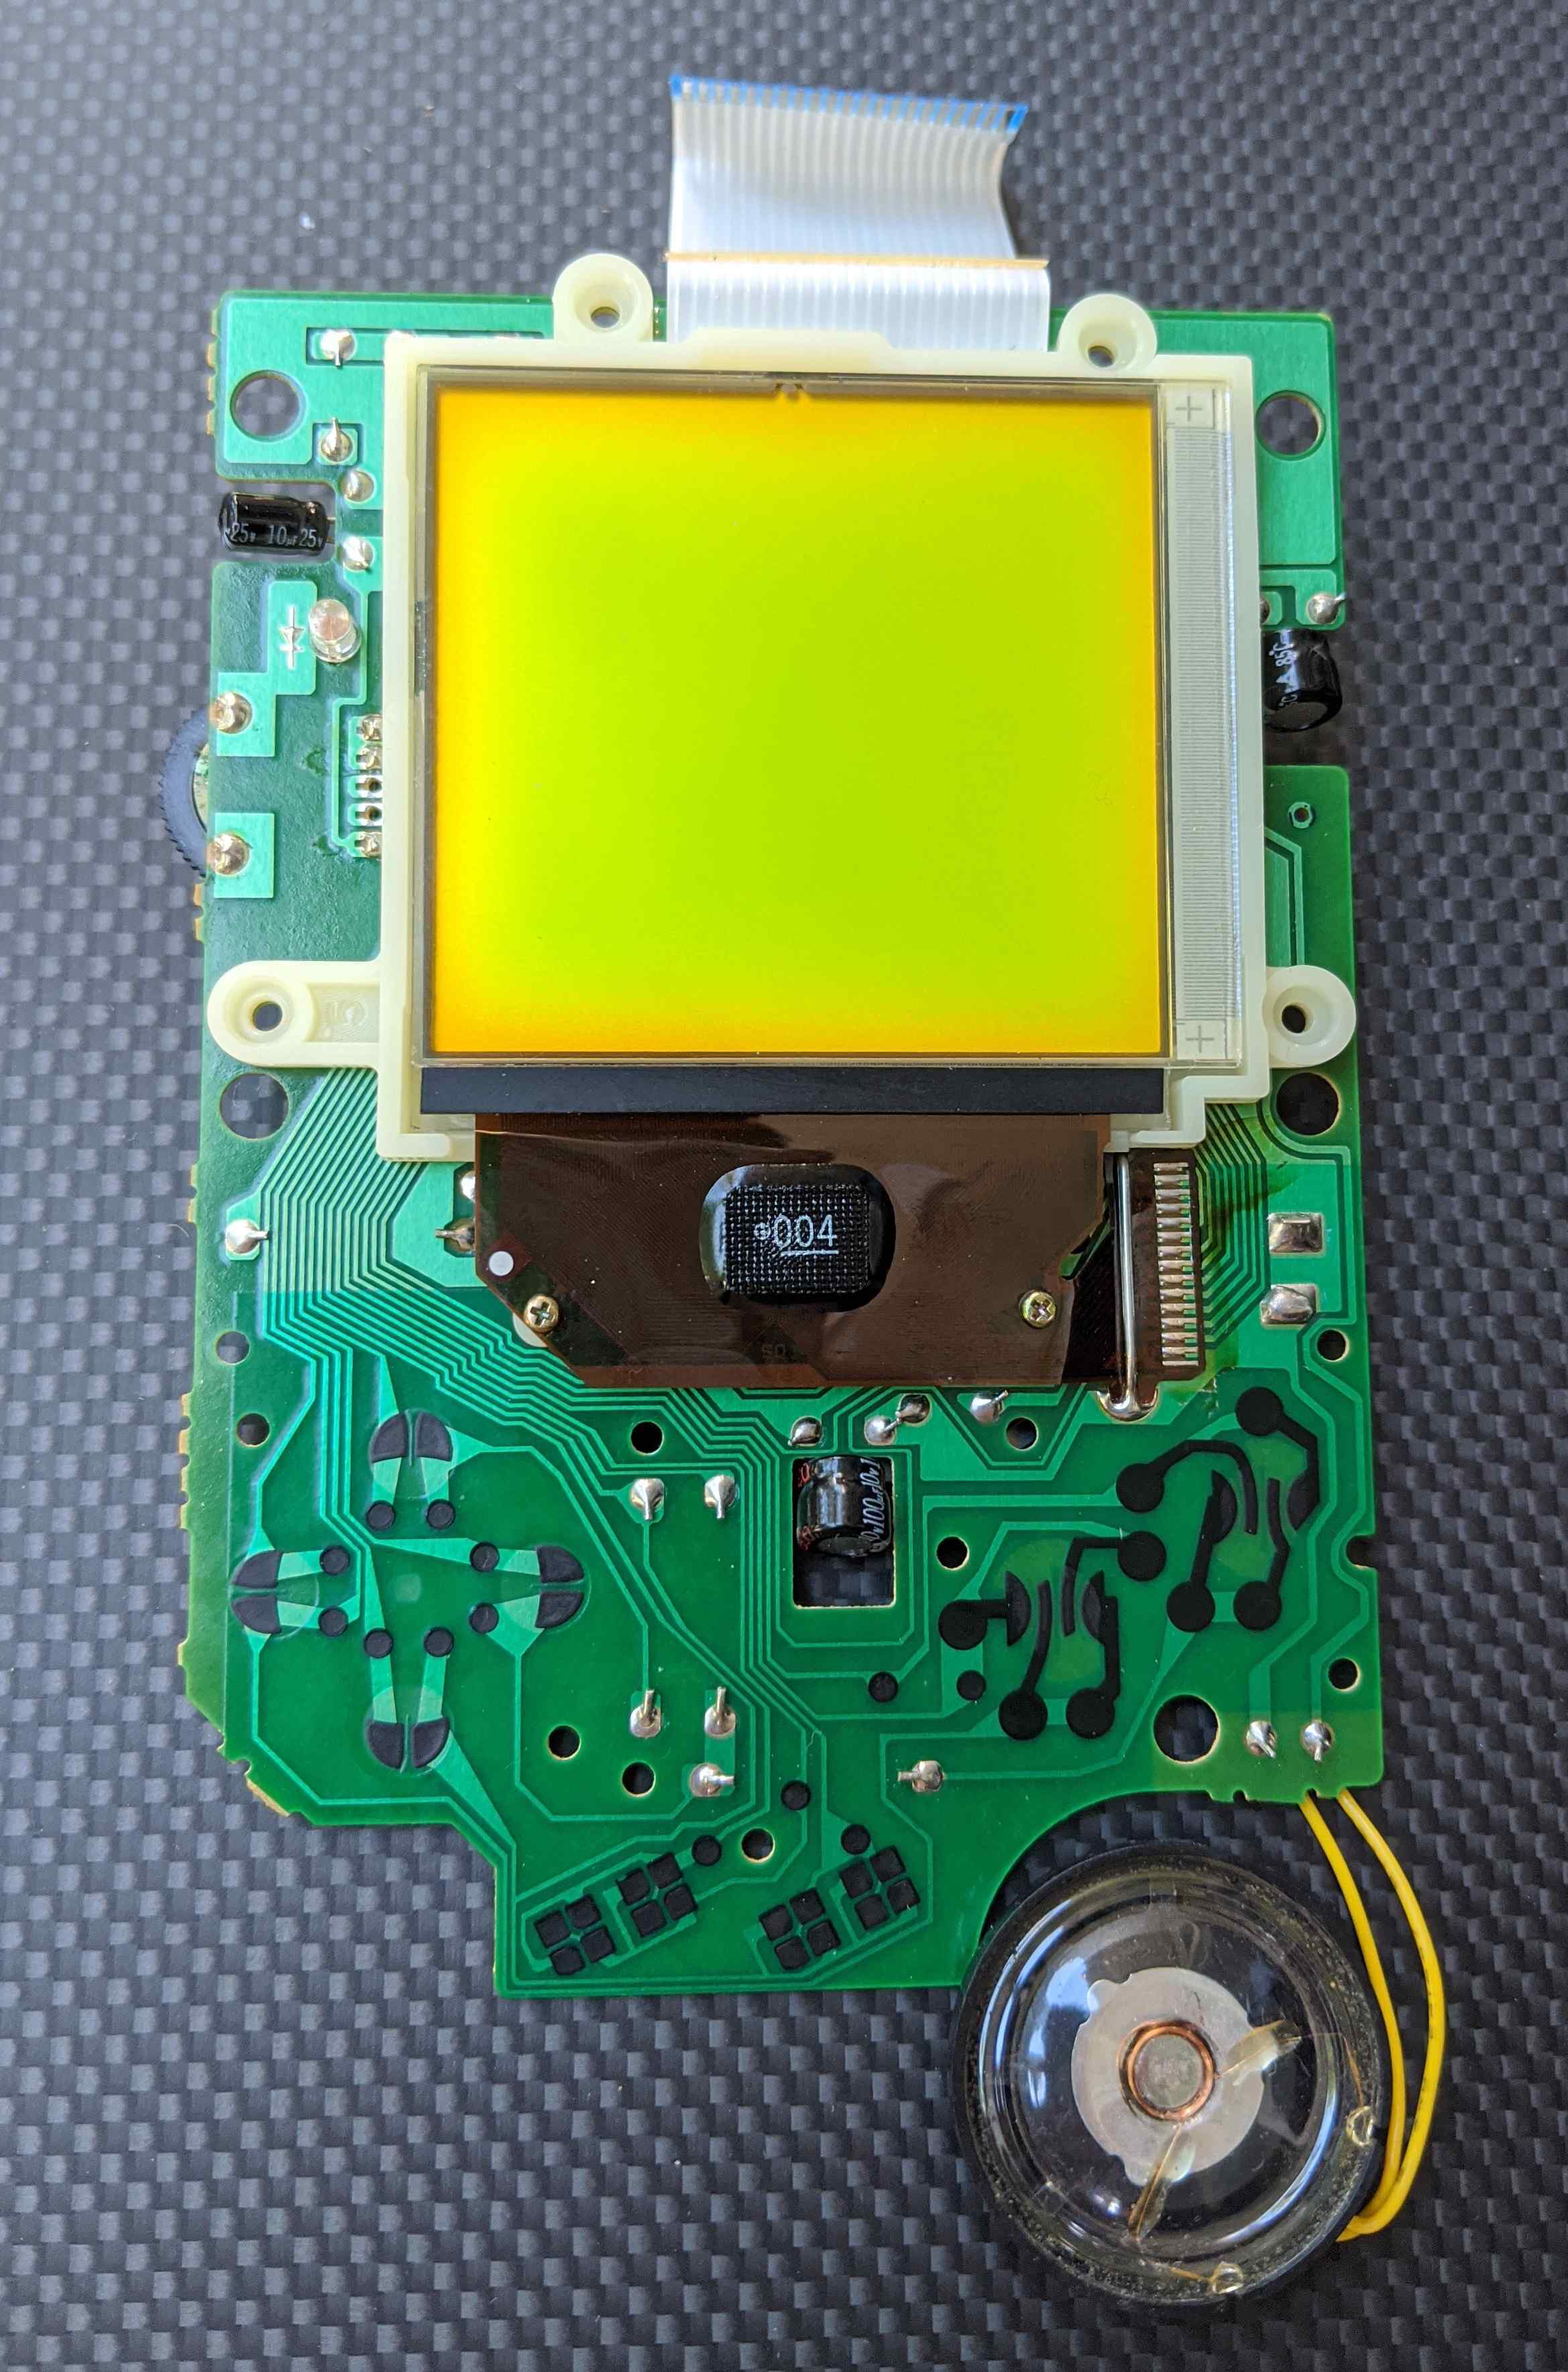 The fronts of the screen PCB